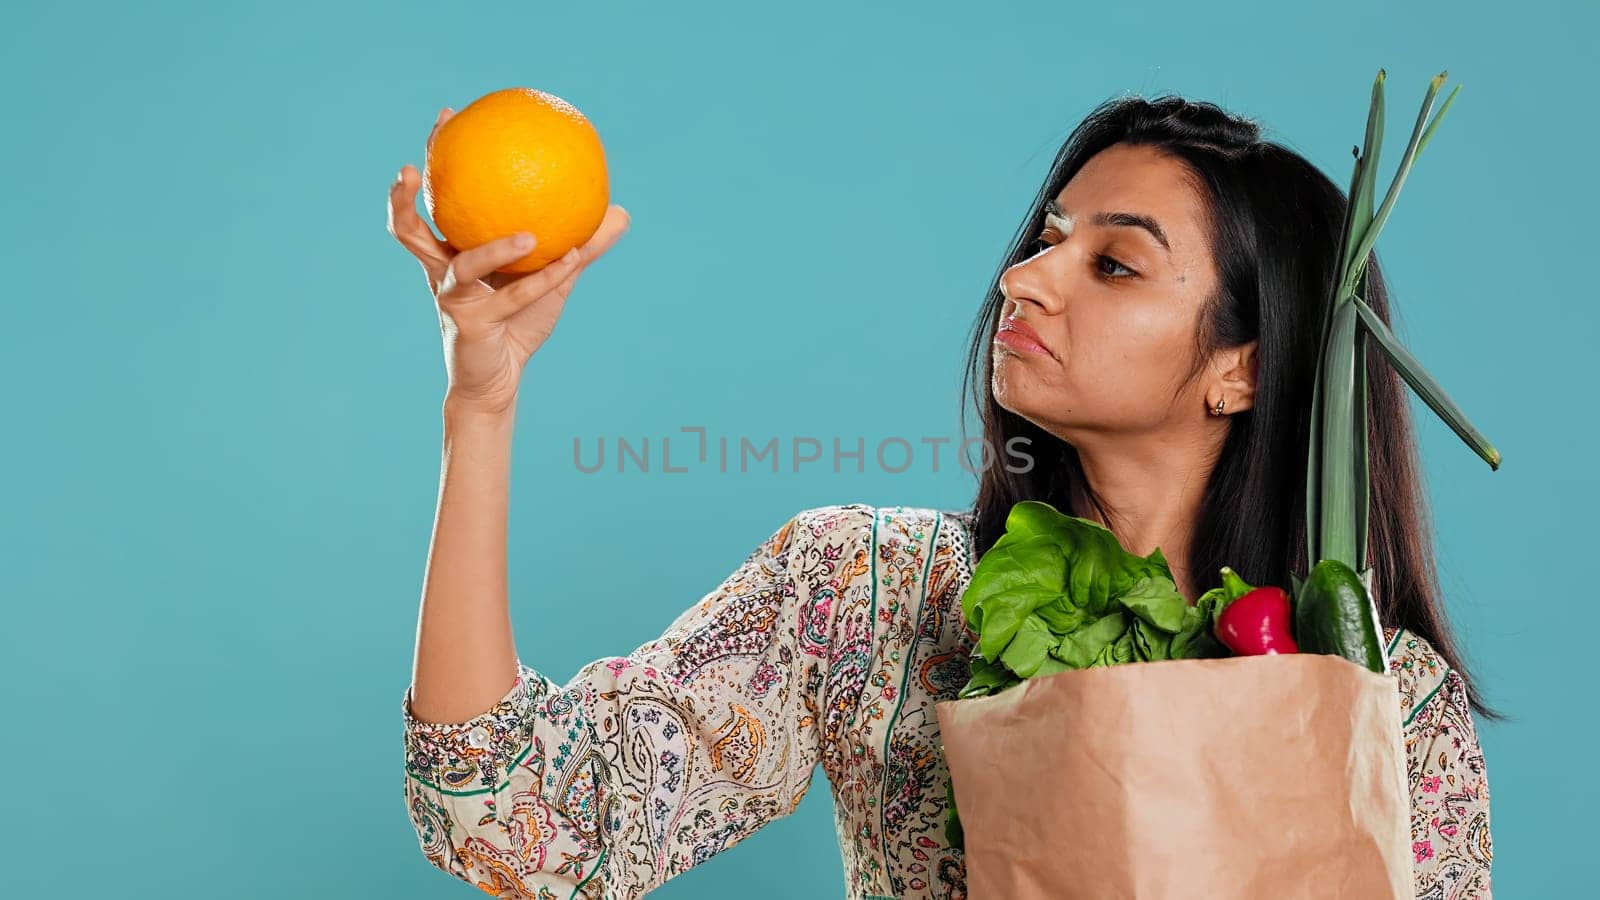 Indian woman with paper bag with vegetables and fruits testing quality, looking at orange, studio background. Vegetarian verifying groceries are ripe after buying them from zero waste shop, camera B